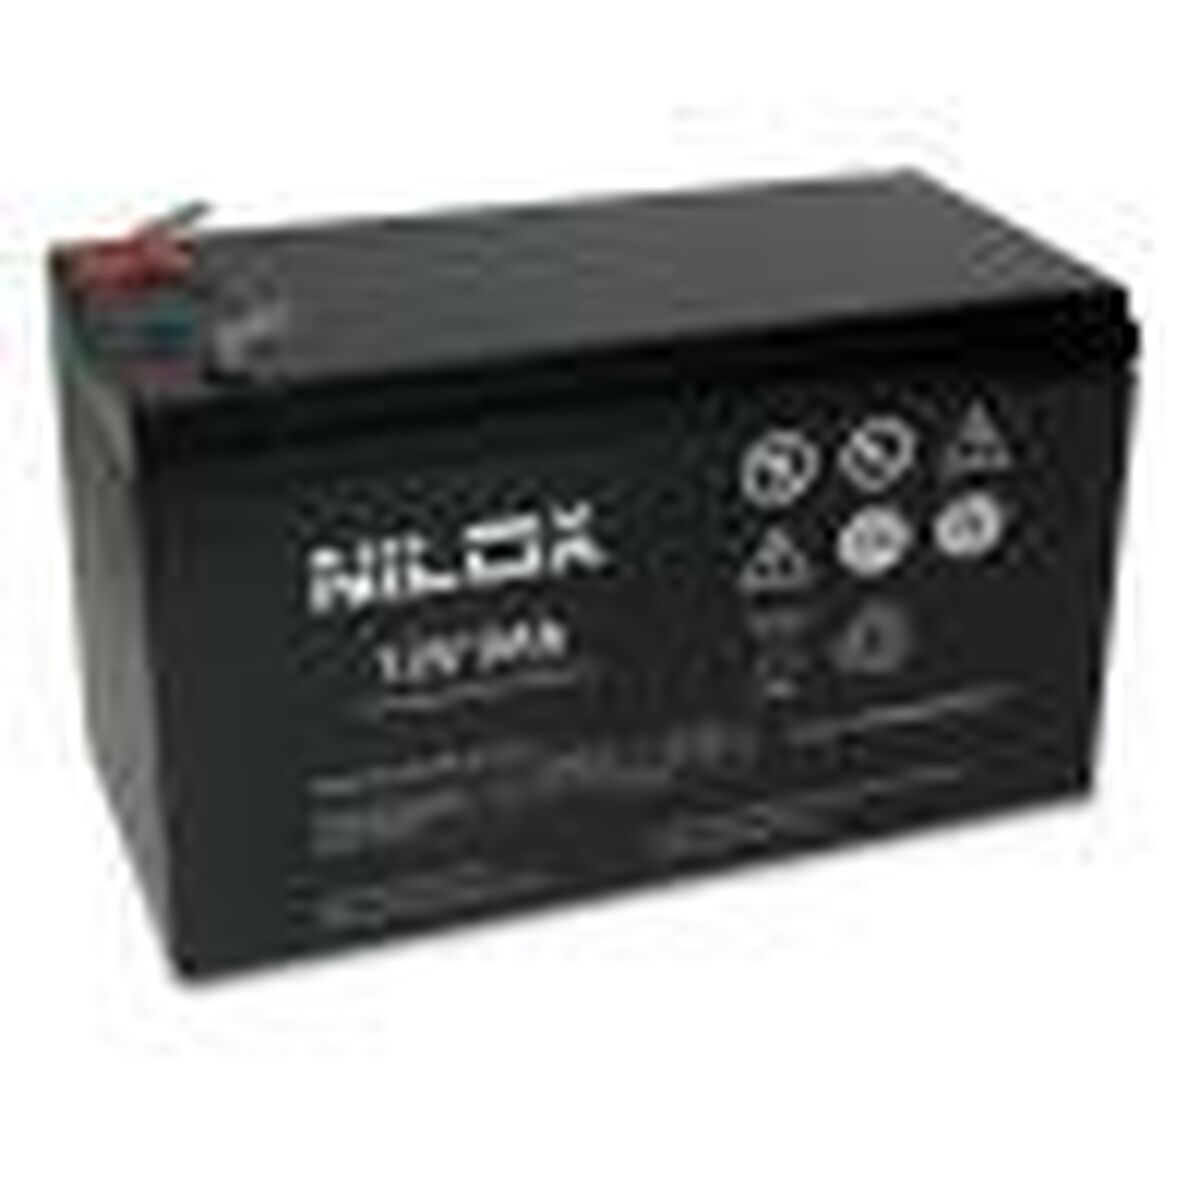 Battery for Uninterruptible Power Supply System UPS Nilox 17NXBA9A00001T